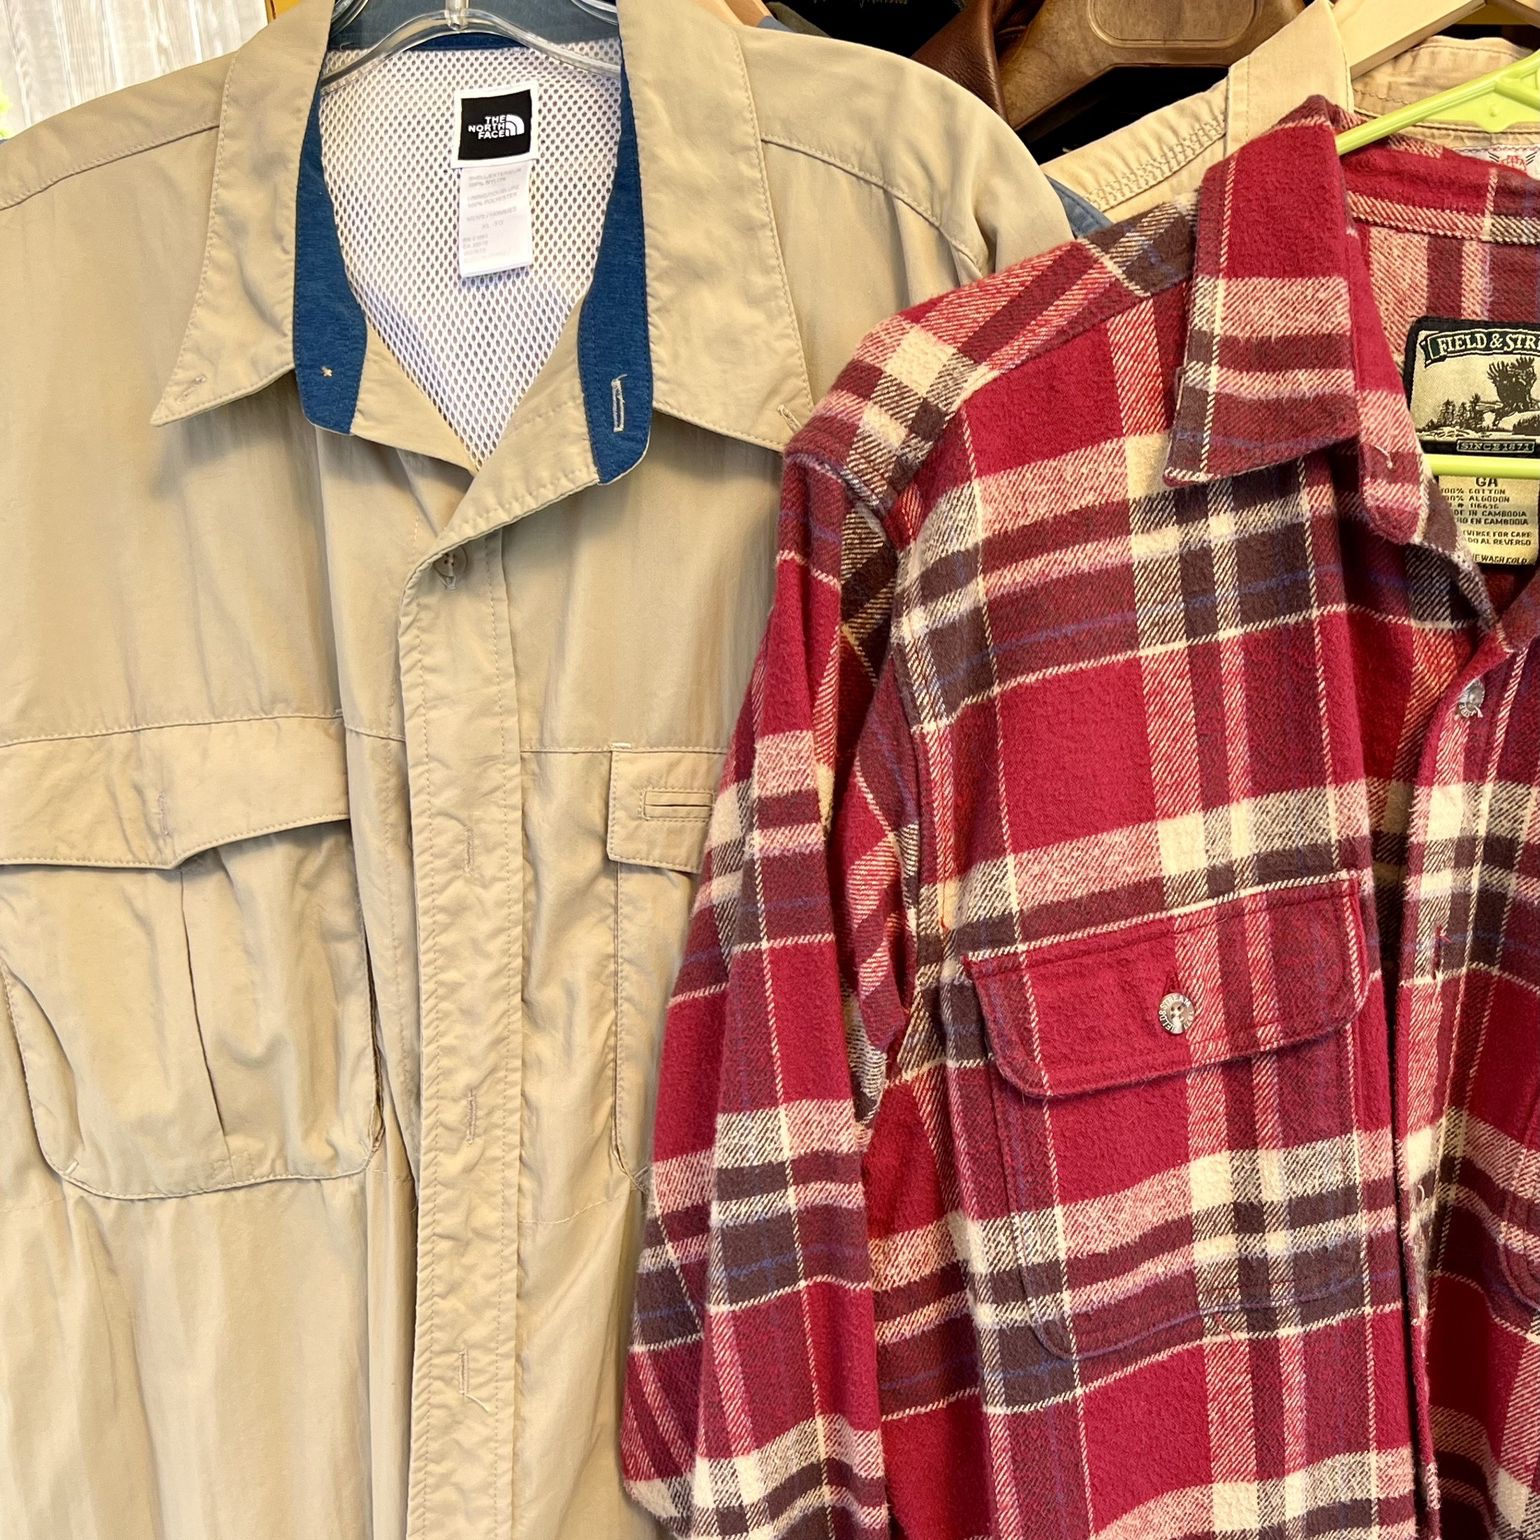 Mens XL and L /Tall Designer Clothing in West Seattle - $10- $40 Max